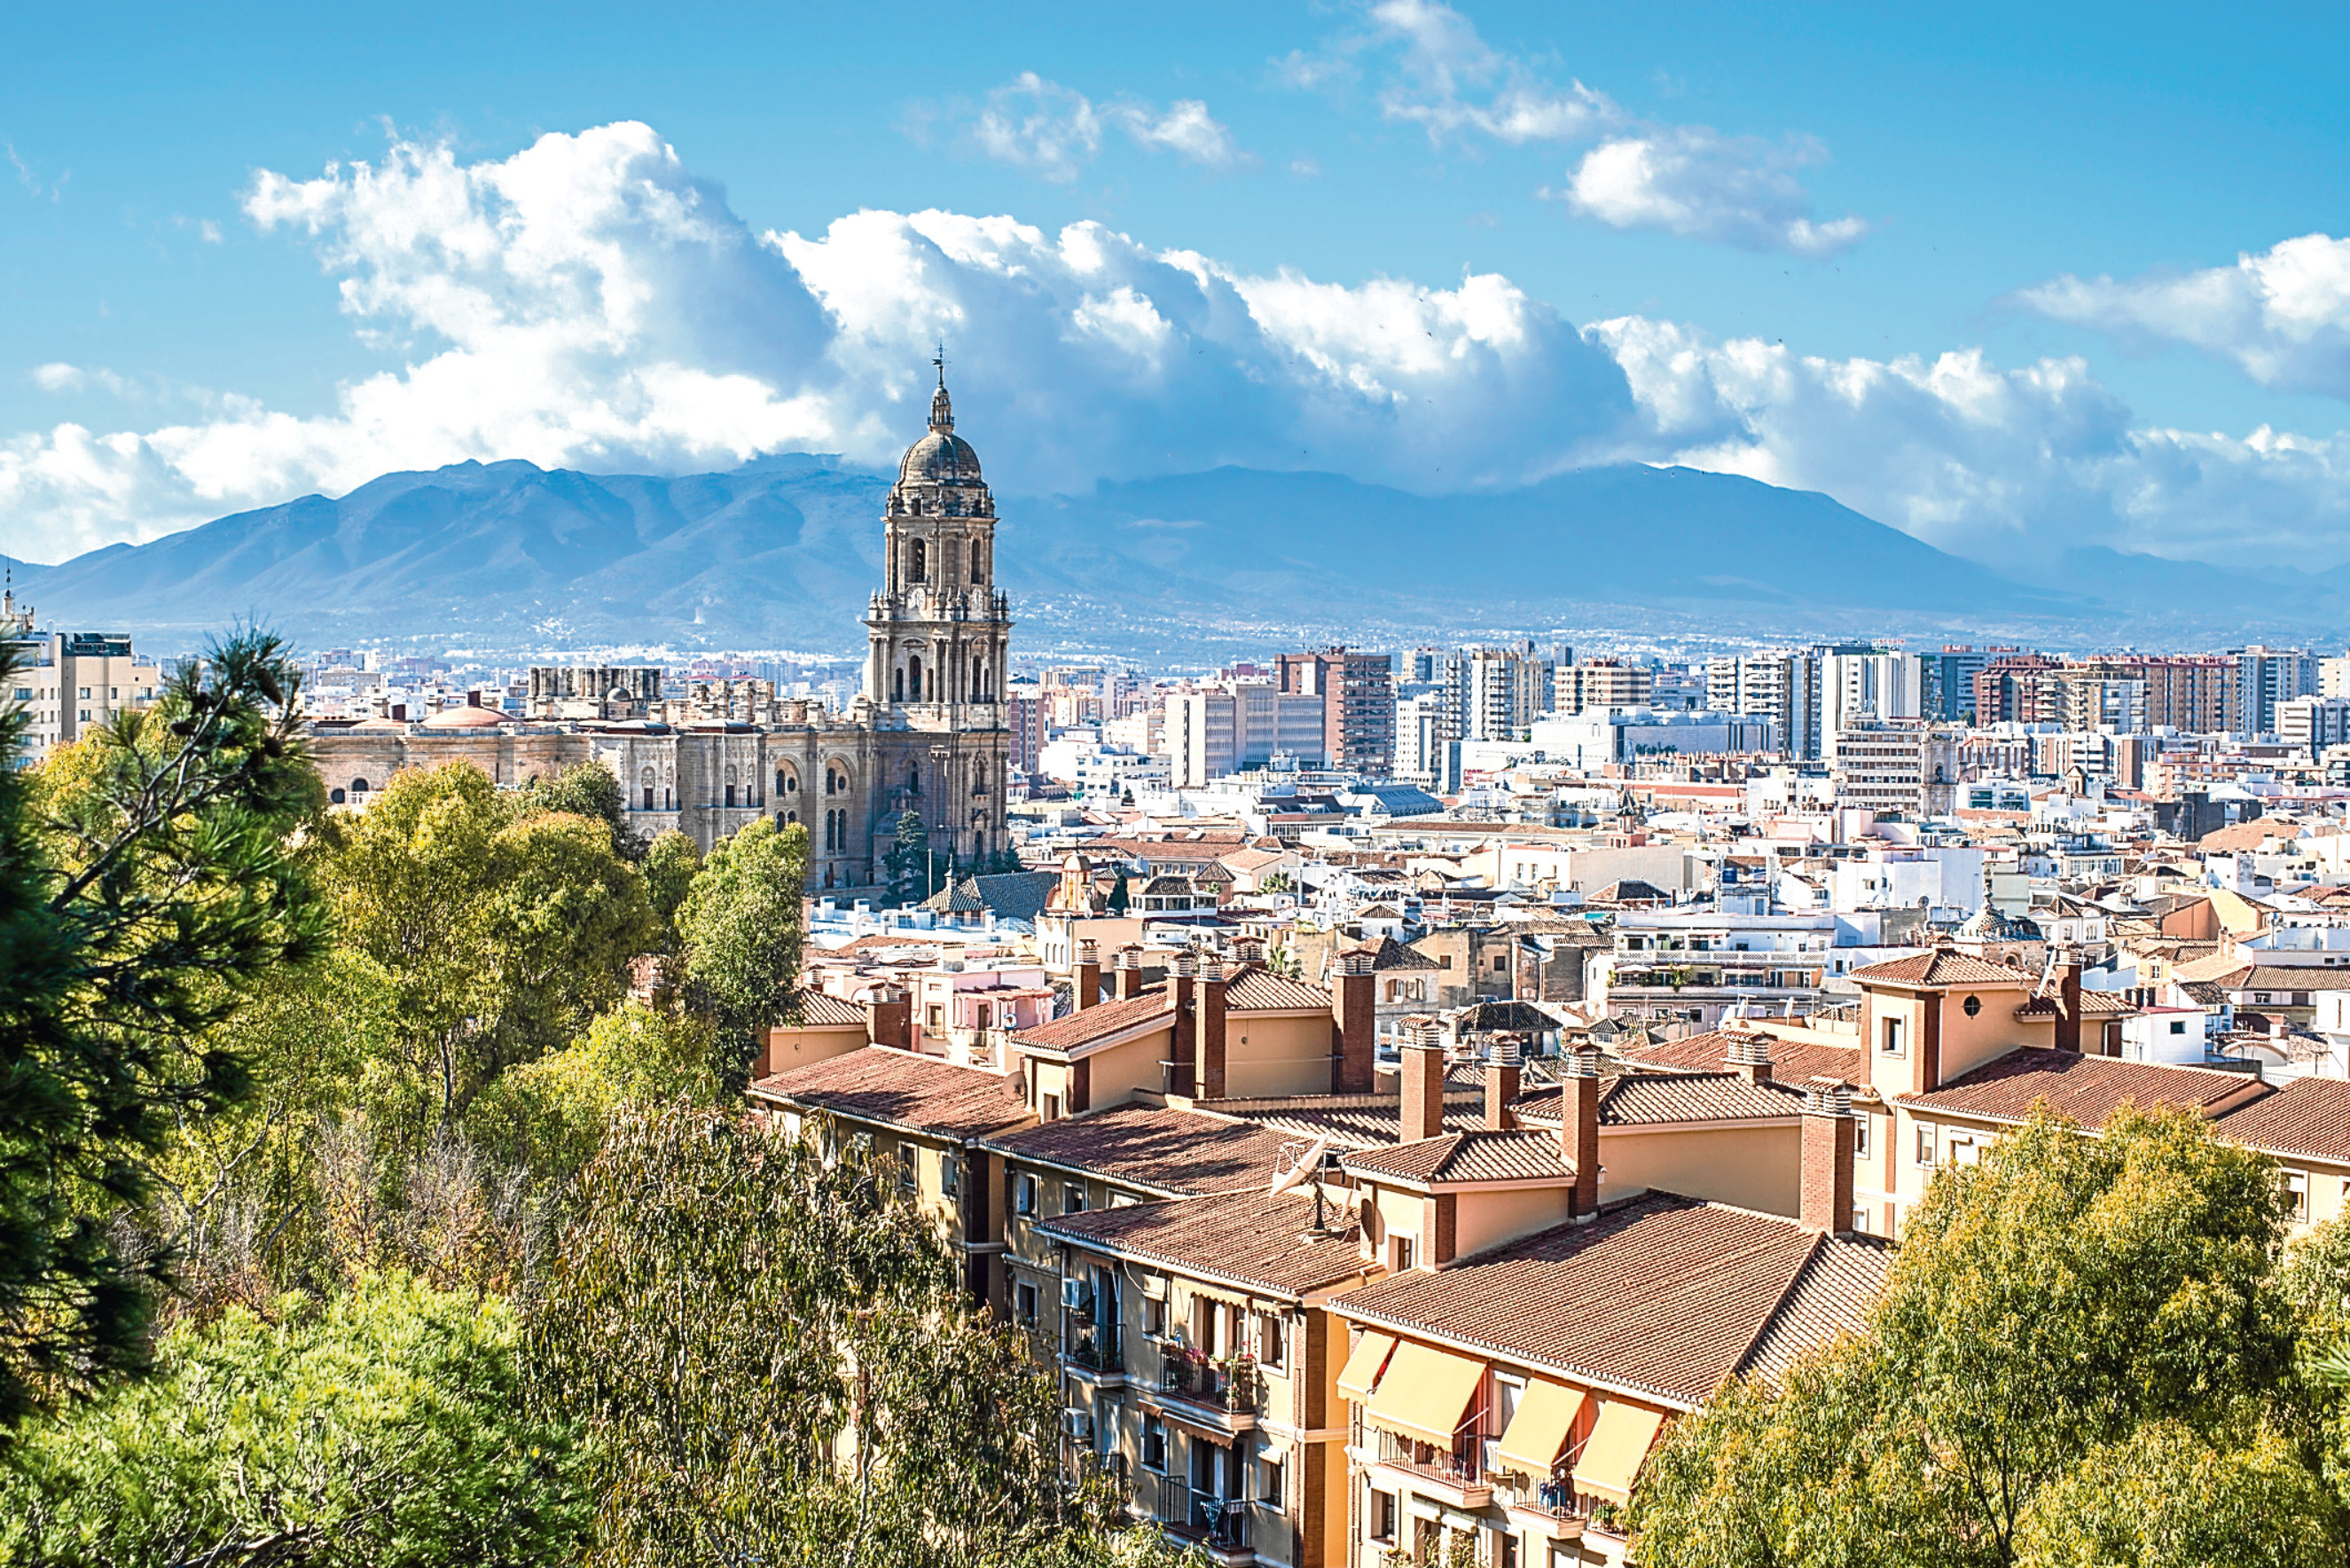 View of the Cathedral of Malaga from the Alcazaba, Andalusia, Spain (iStock)